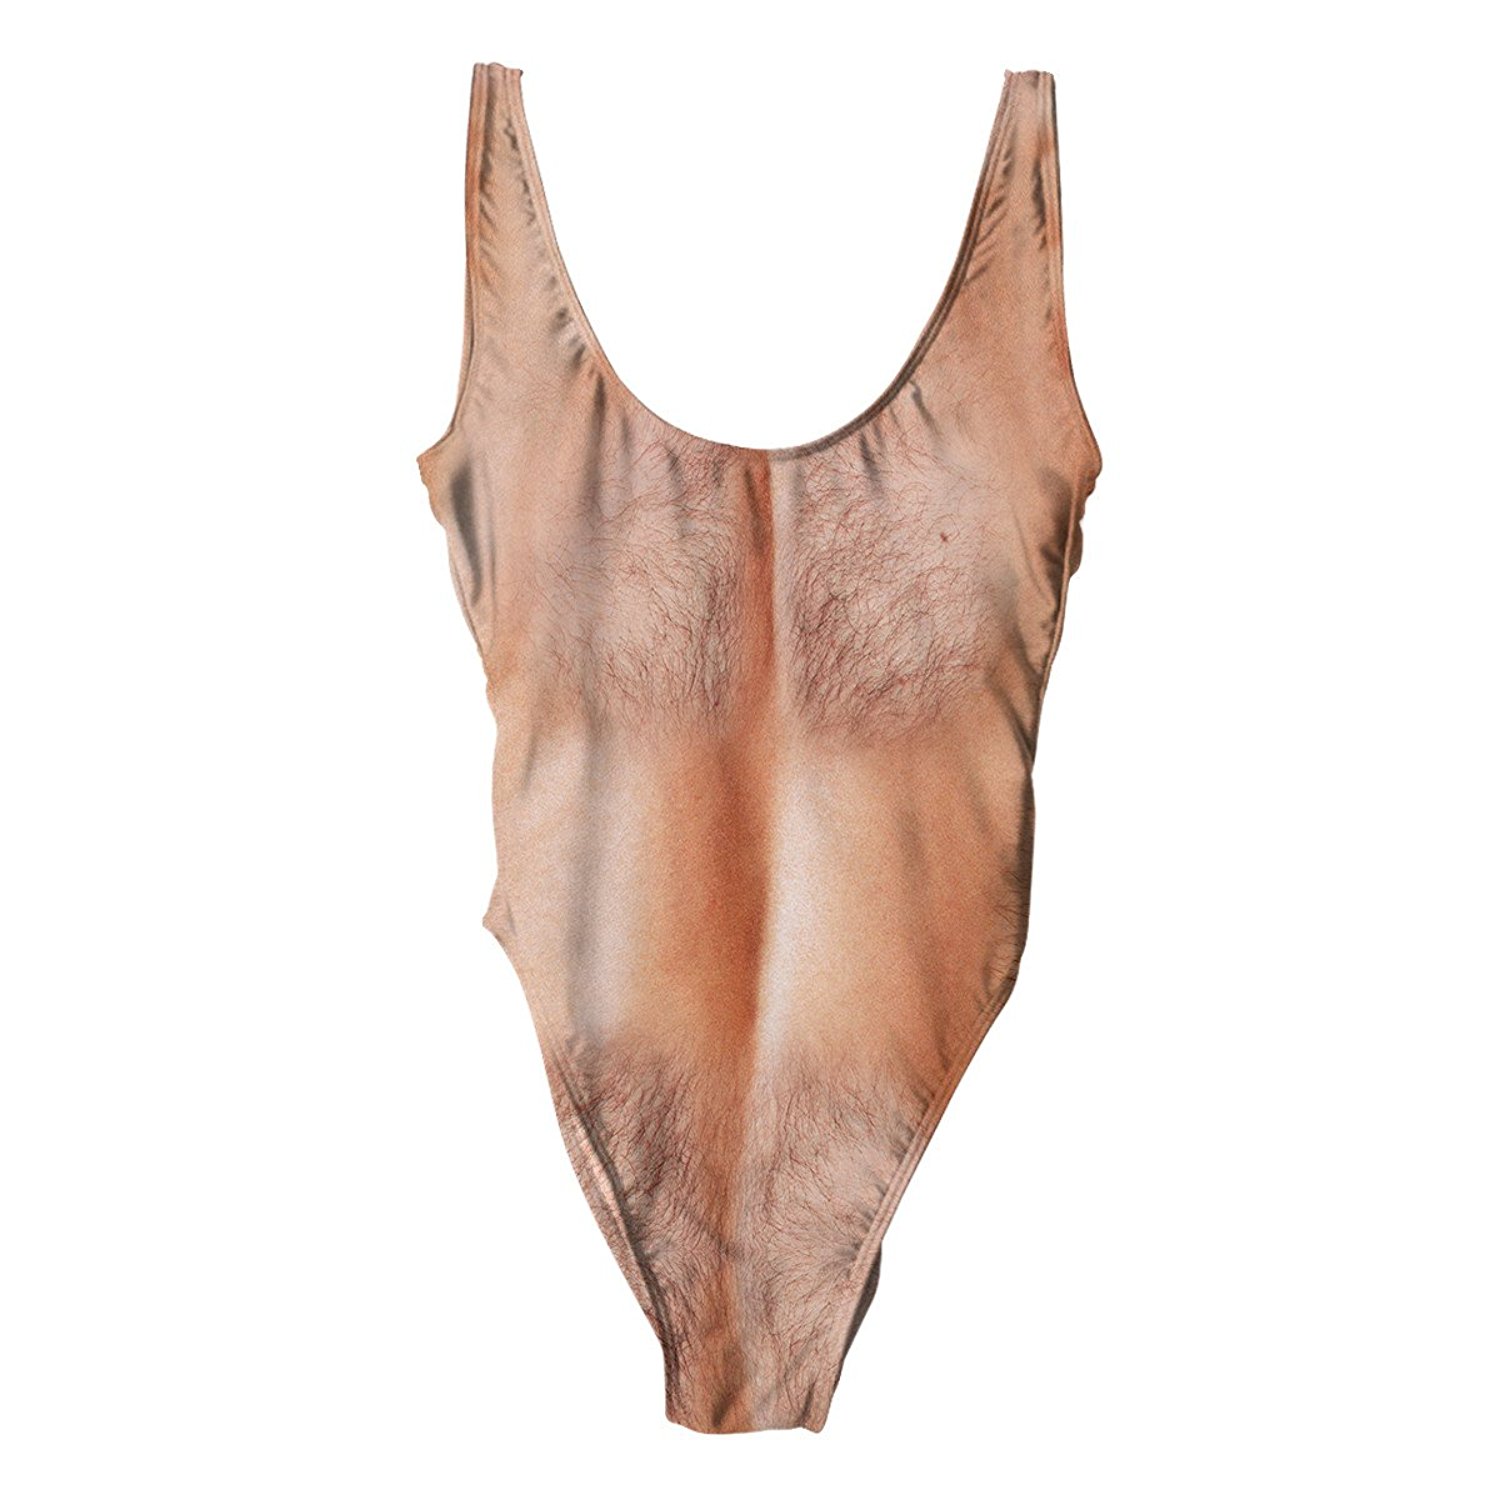 Hairy Chest One Piece Swimsuit - OMG Gimme!